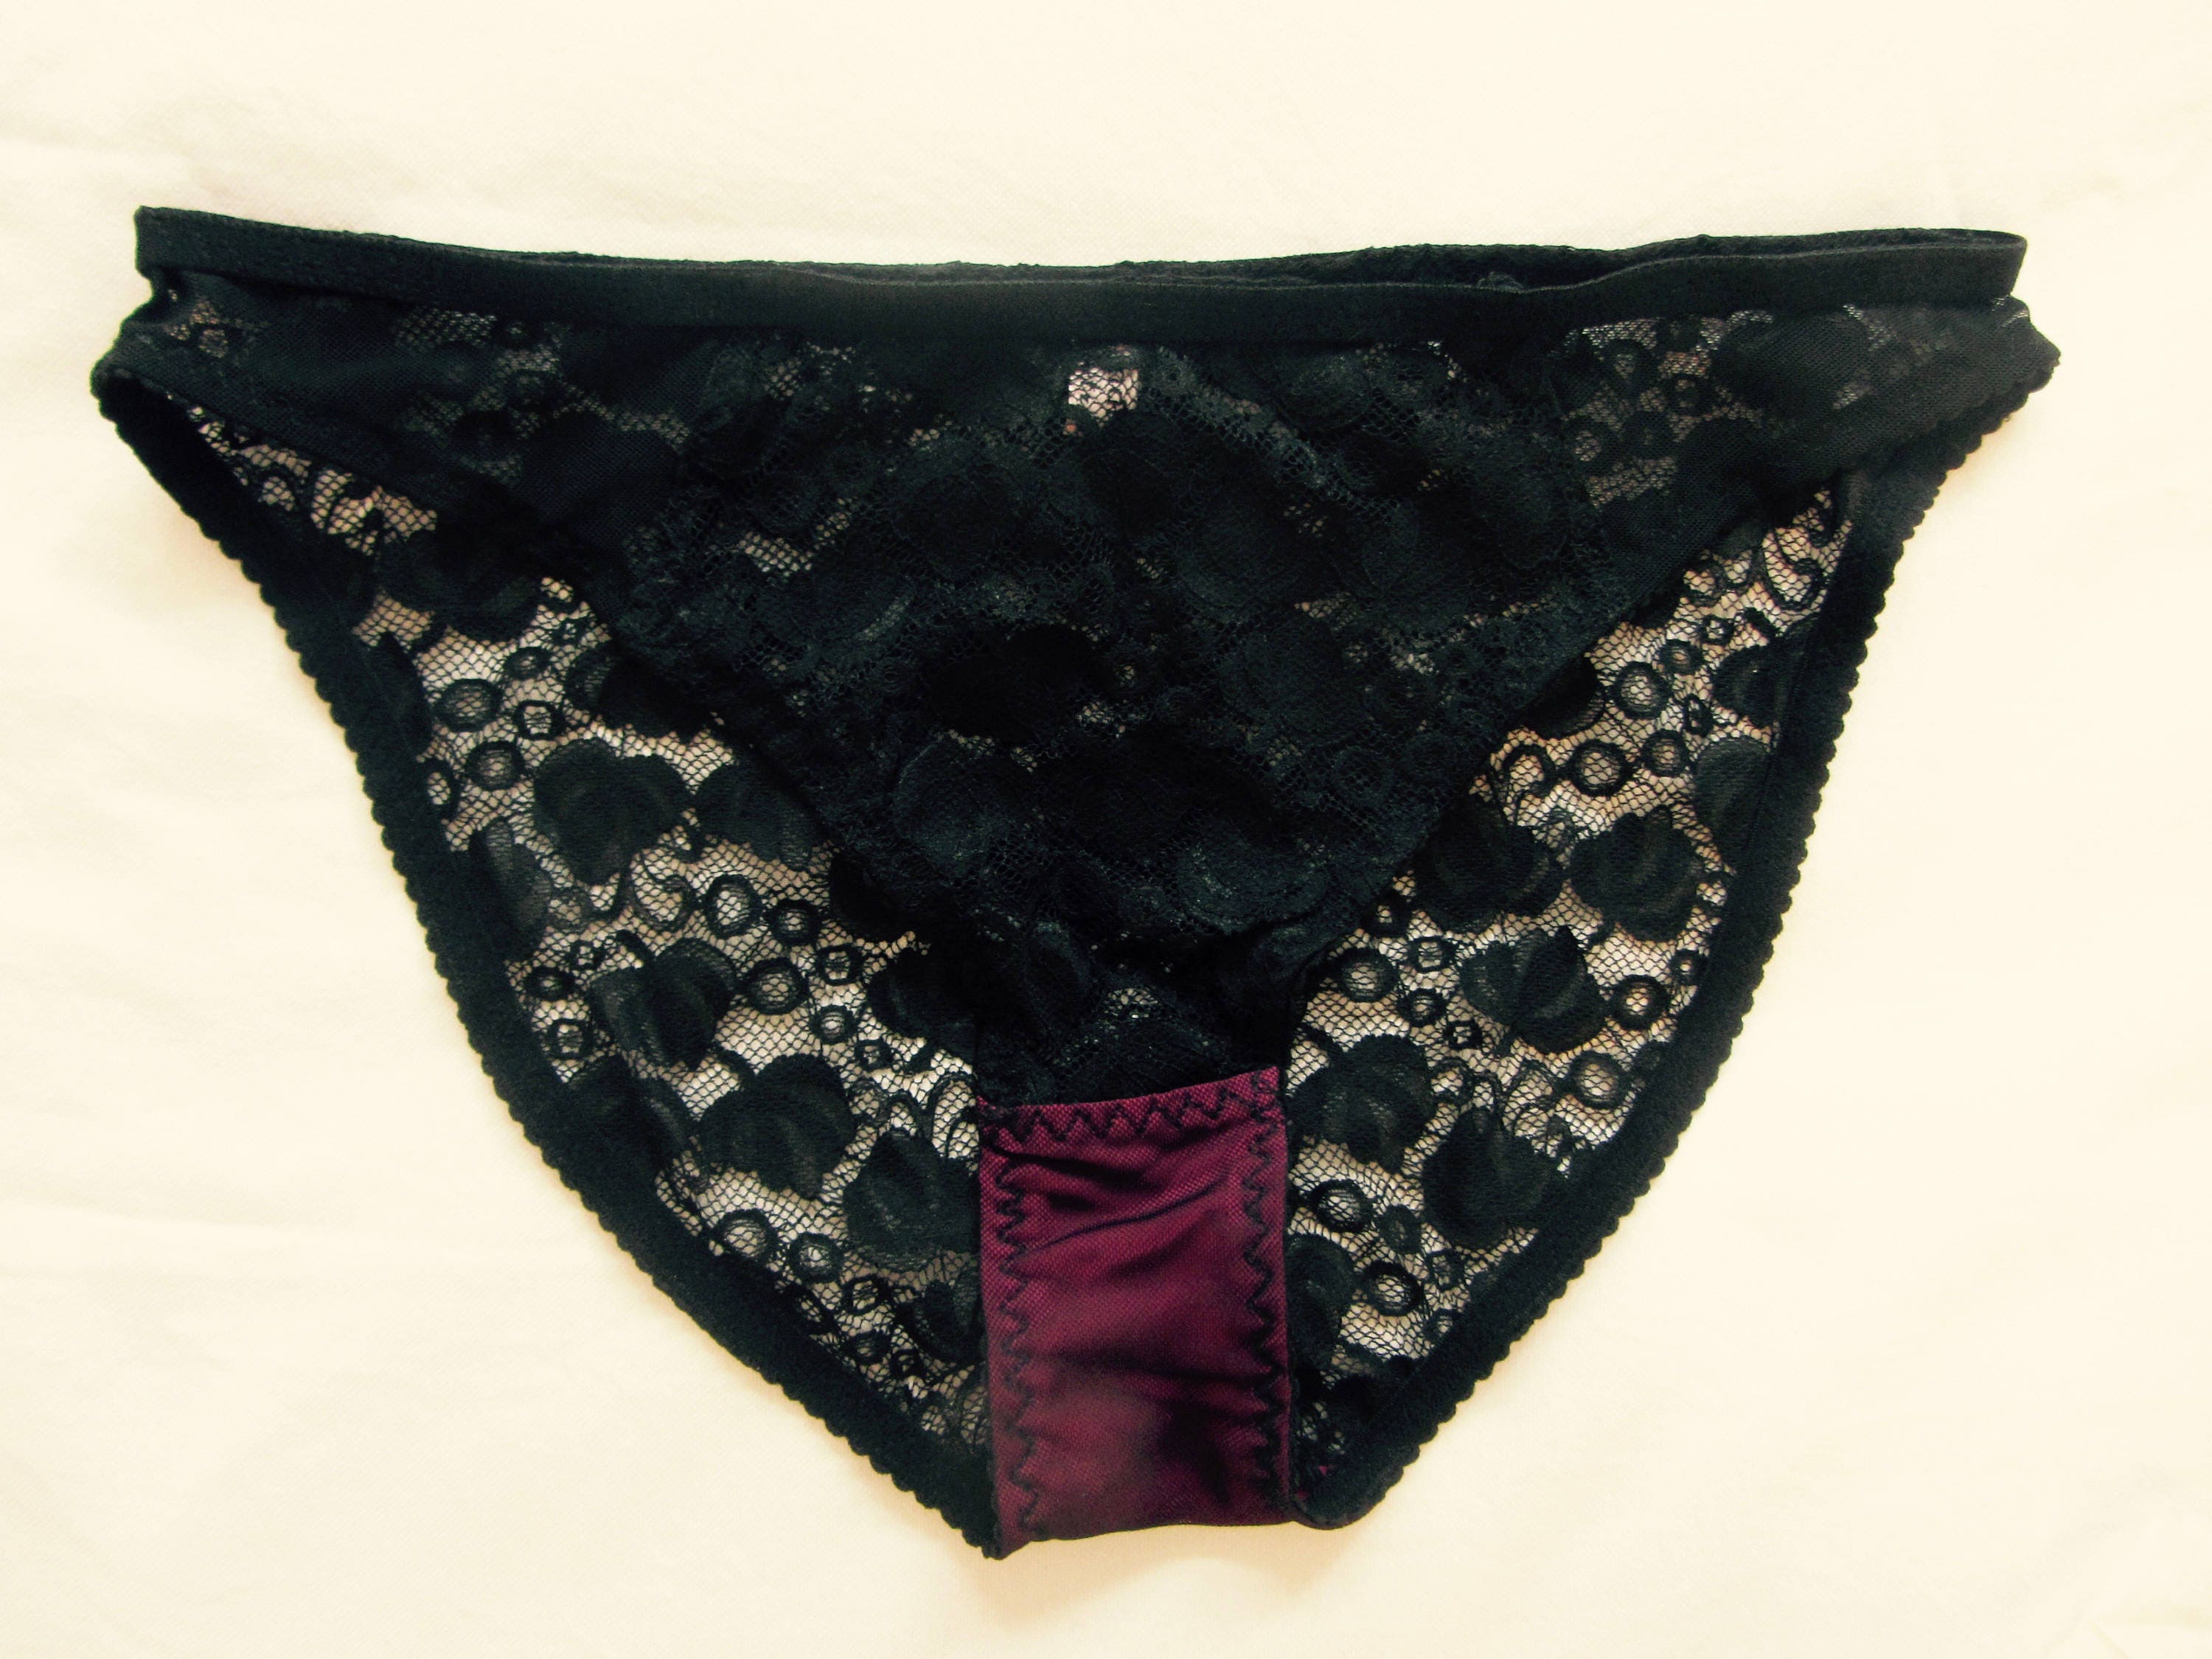 REDUCED Black Lace 'marie' Panelled Knickers, Size S, Hips 34-36 